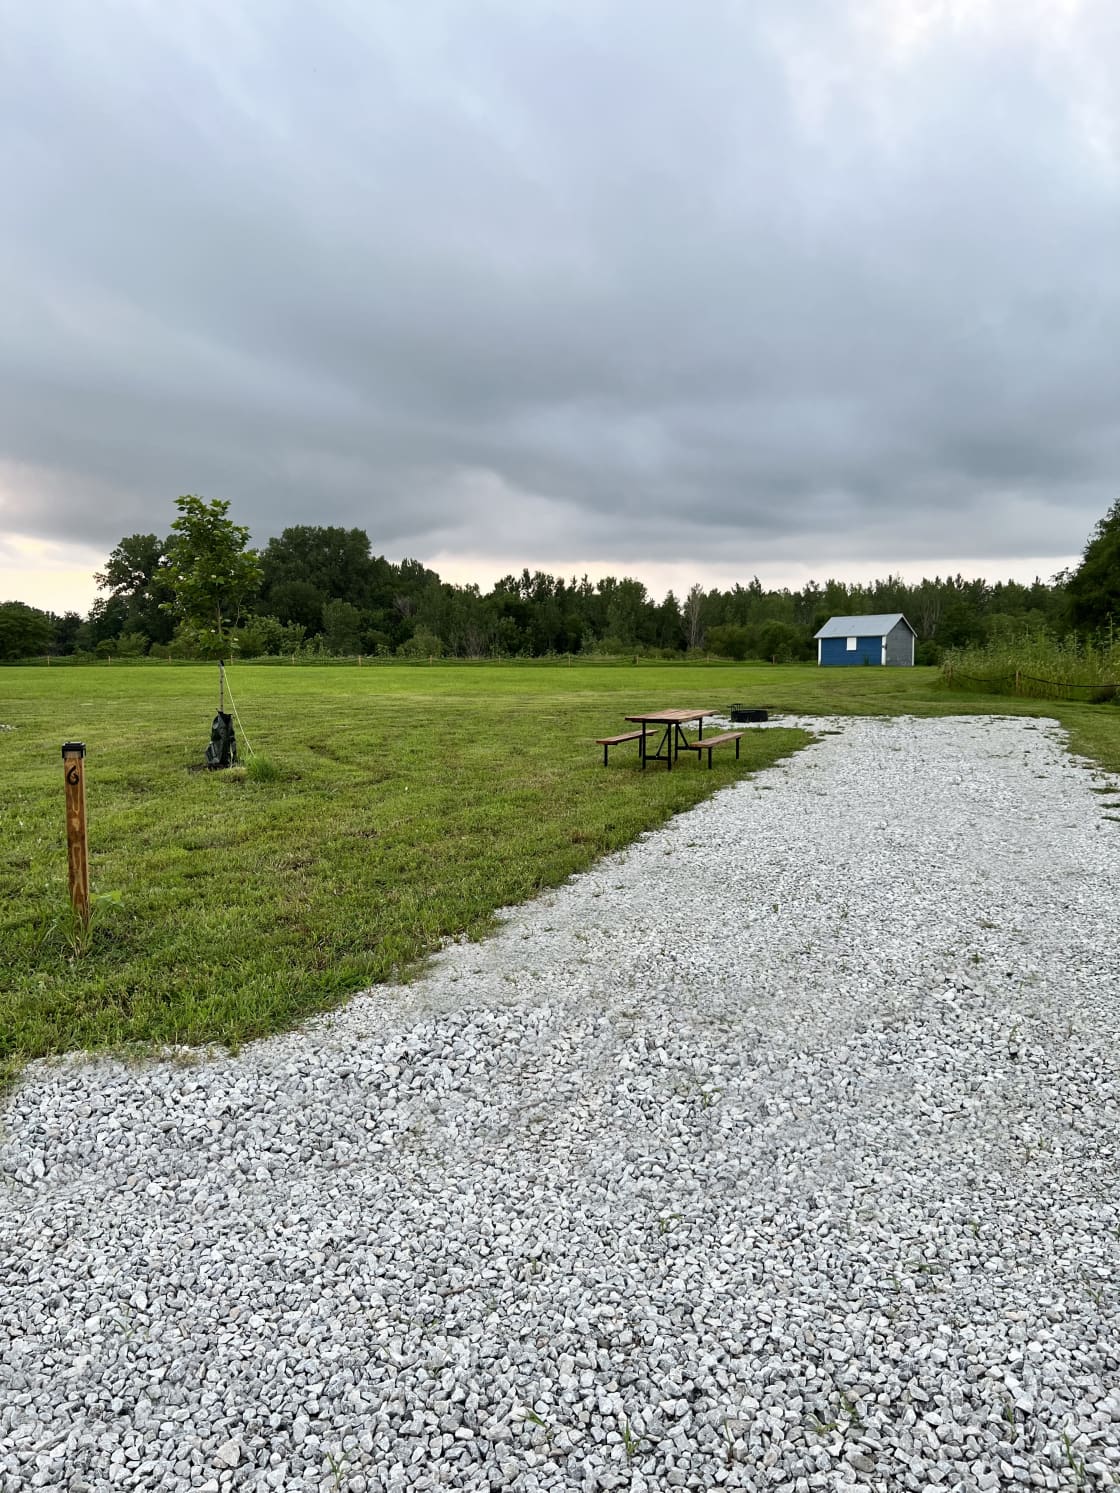 Little Rivers Edge RV Park and Camp